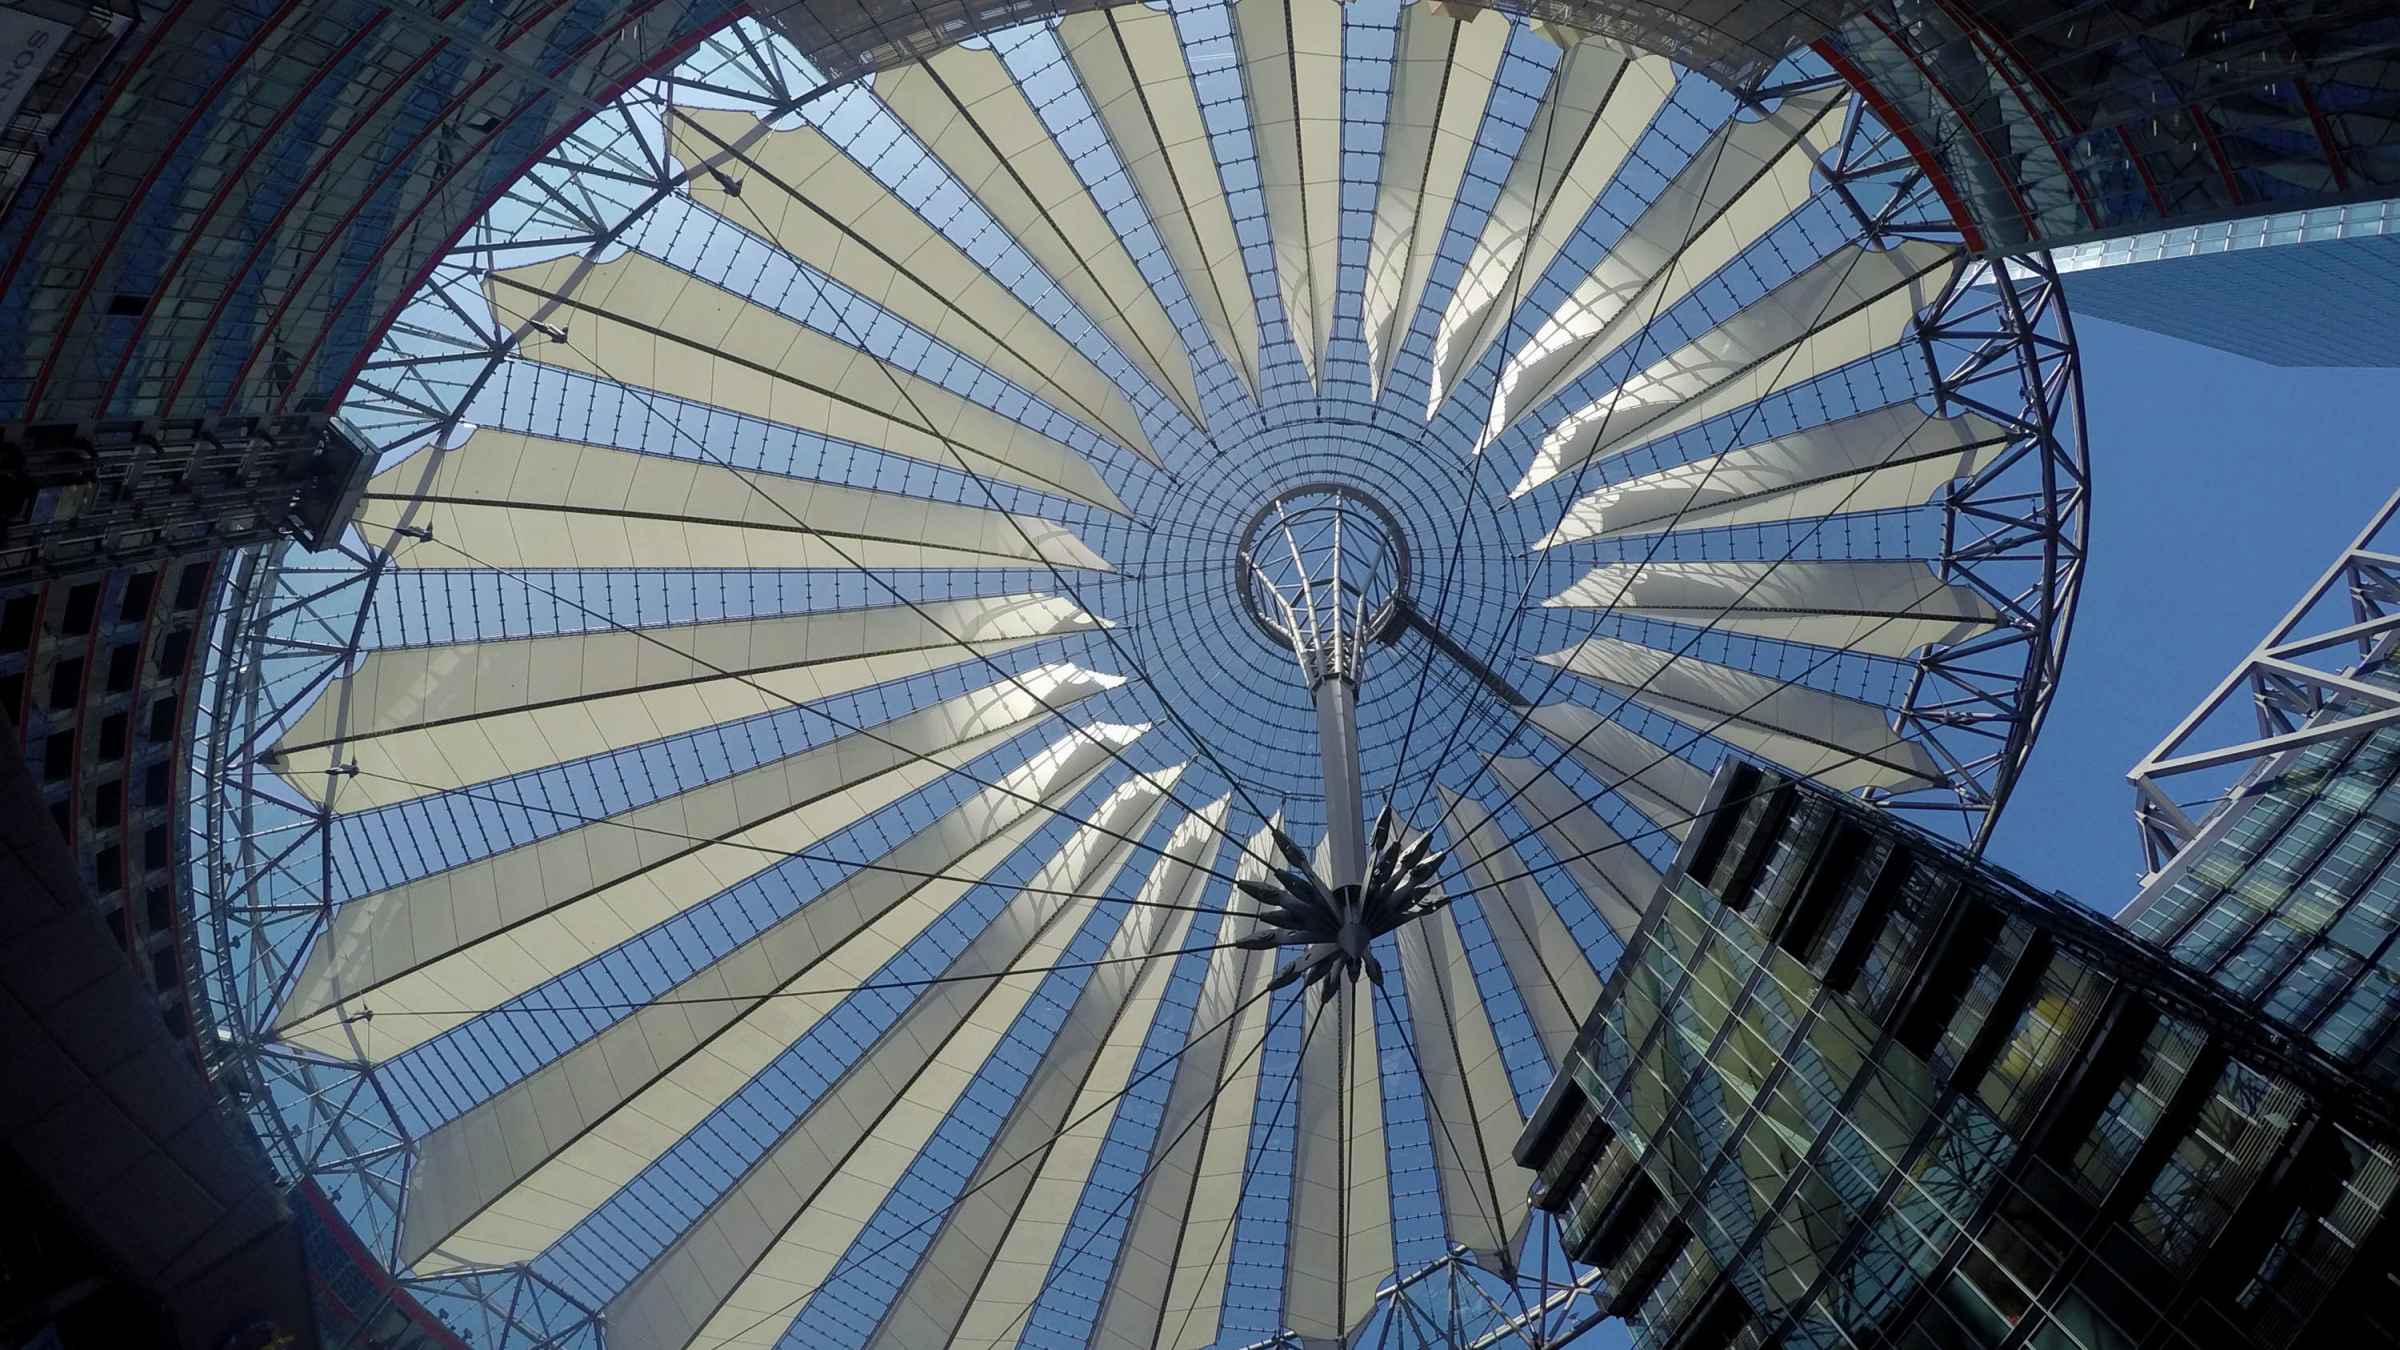 Sony Center Berlin Book Tickets Tours Getyourguide